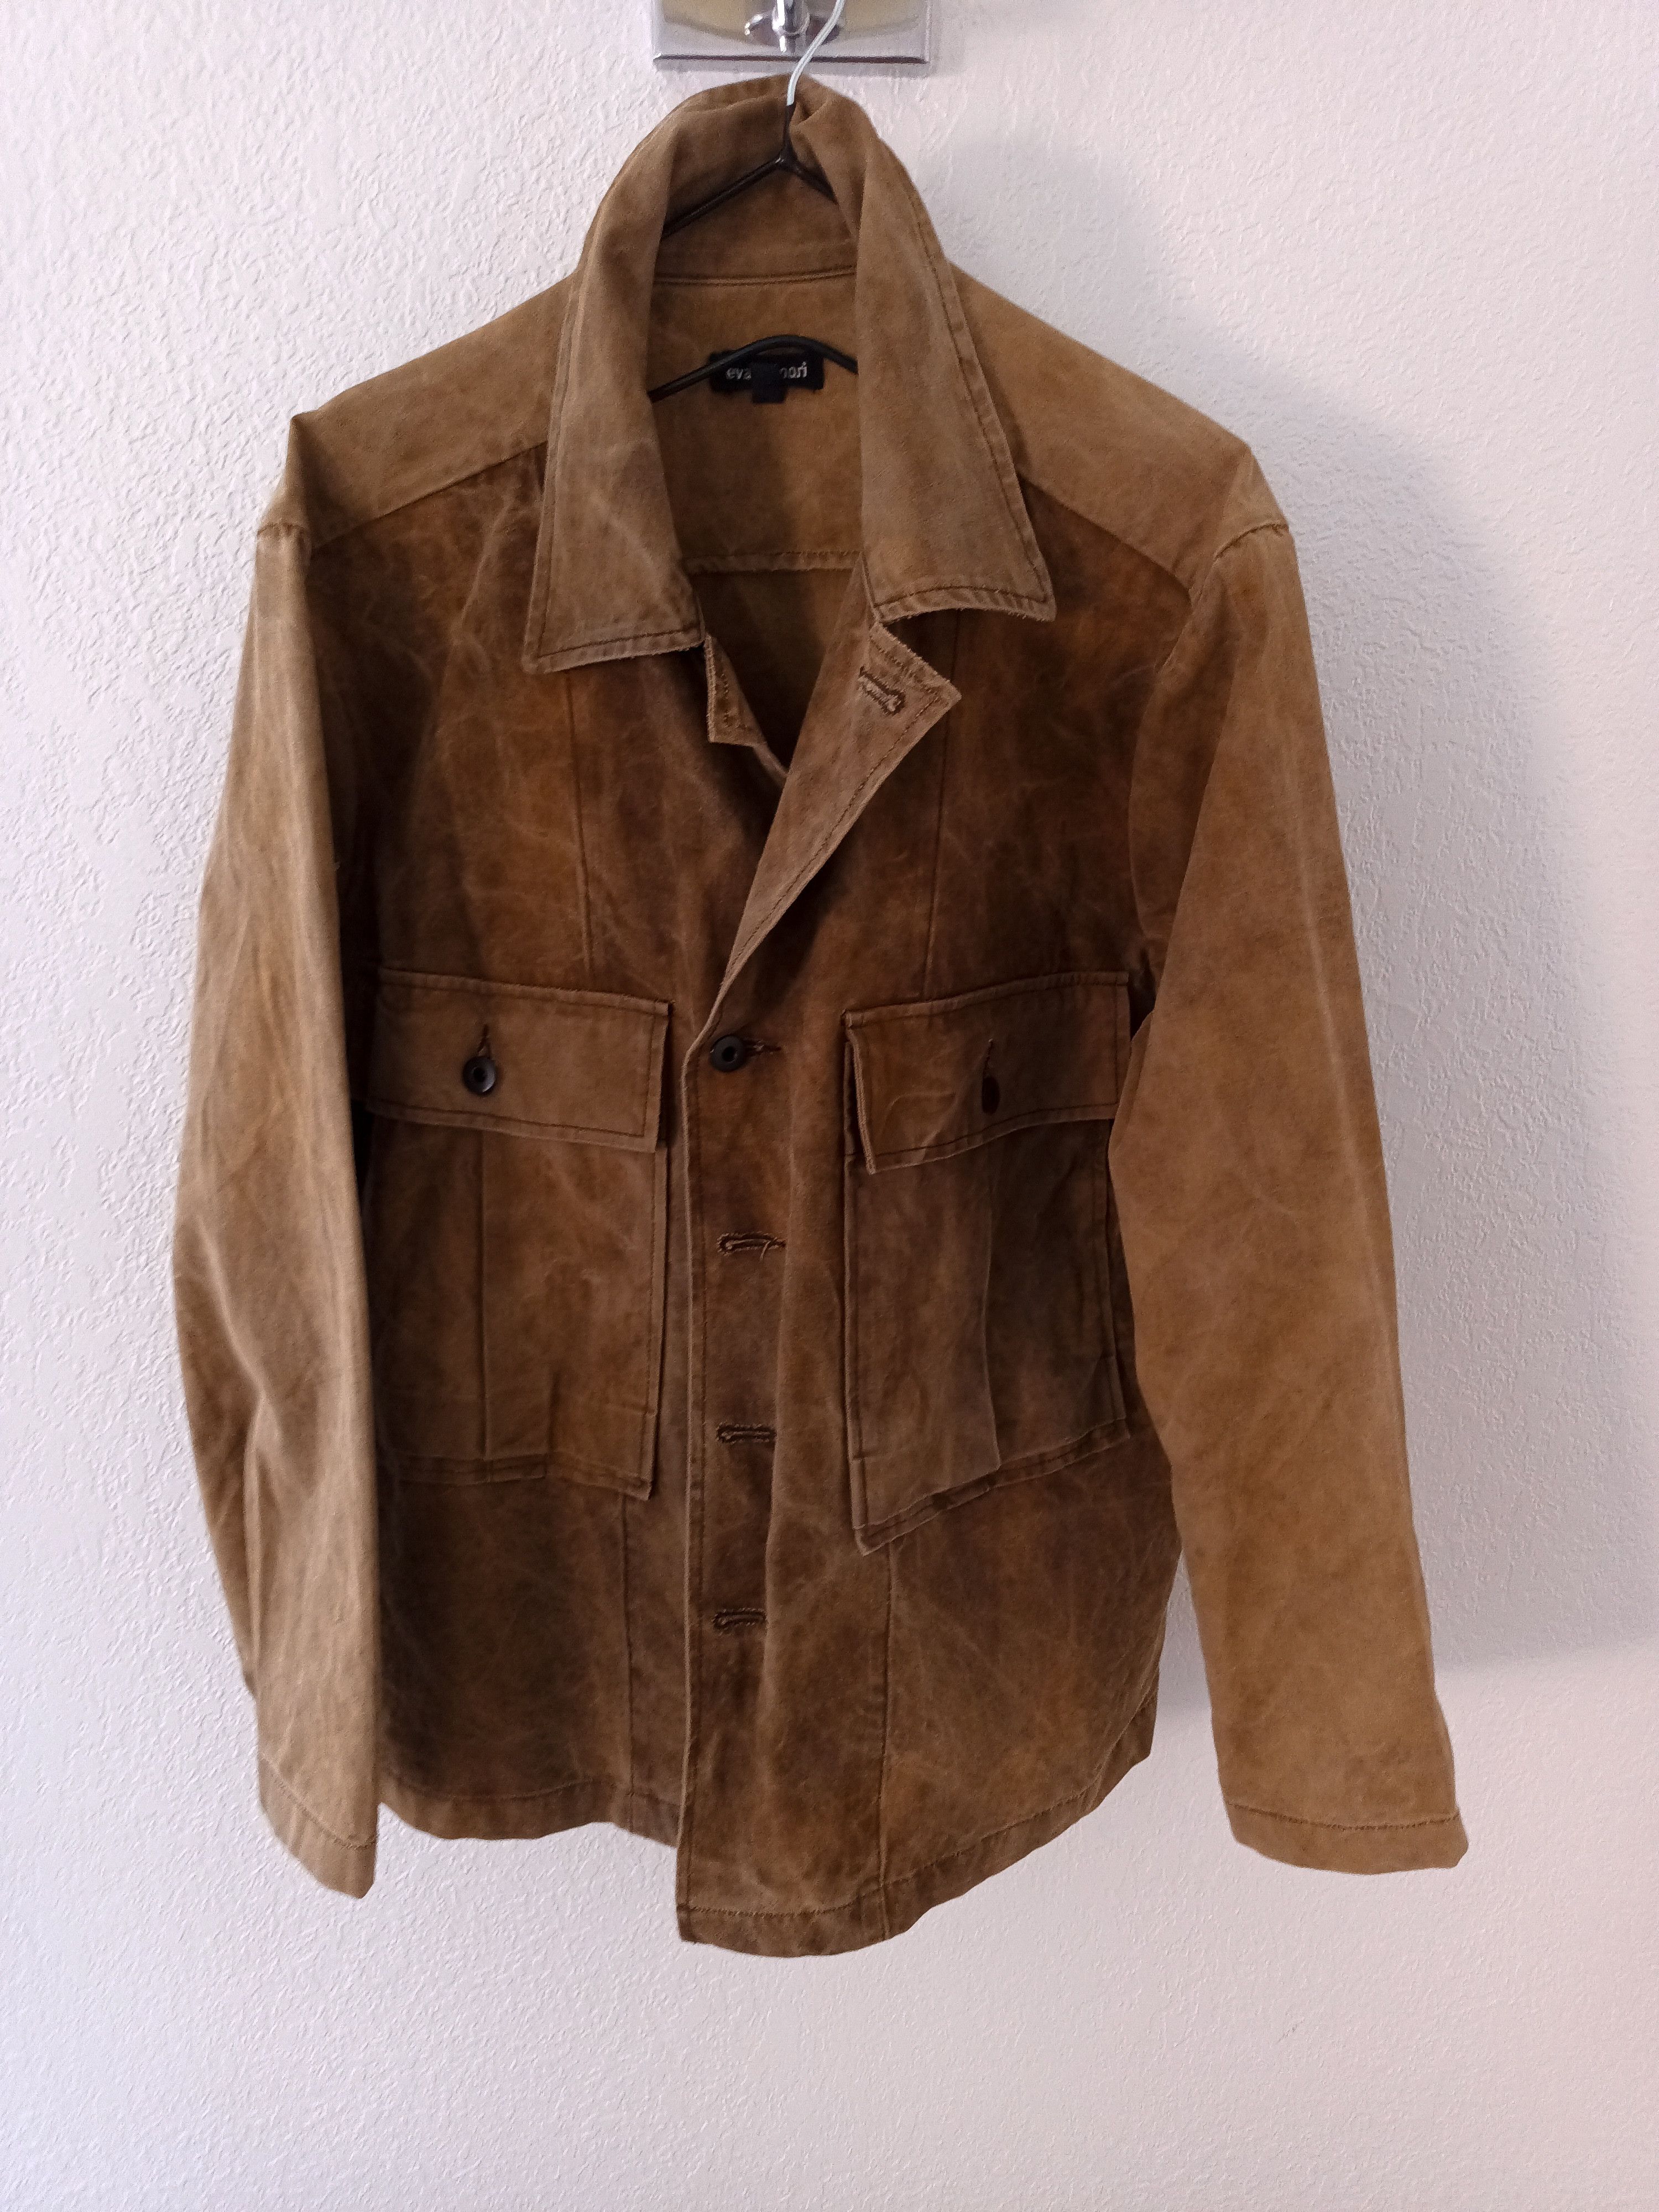 Pre-owned Evan Kinori Bellow Pocket Jacket - Persimmon Dyed Canvas In Brown